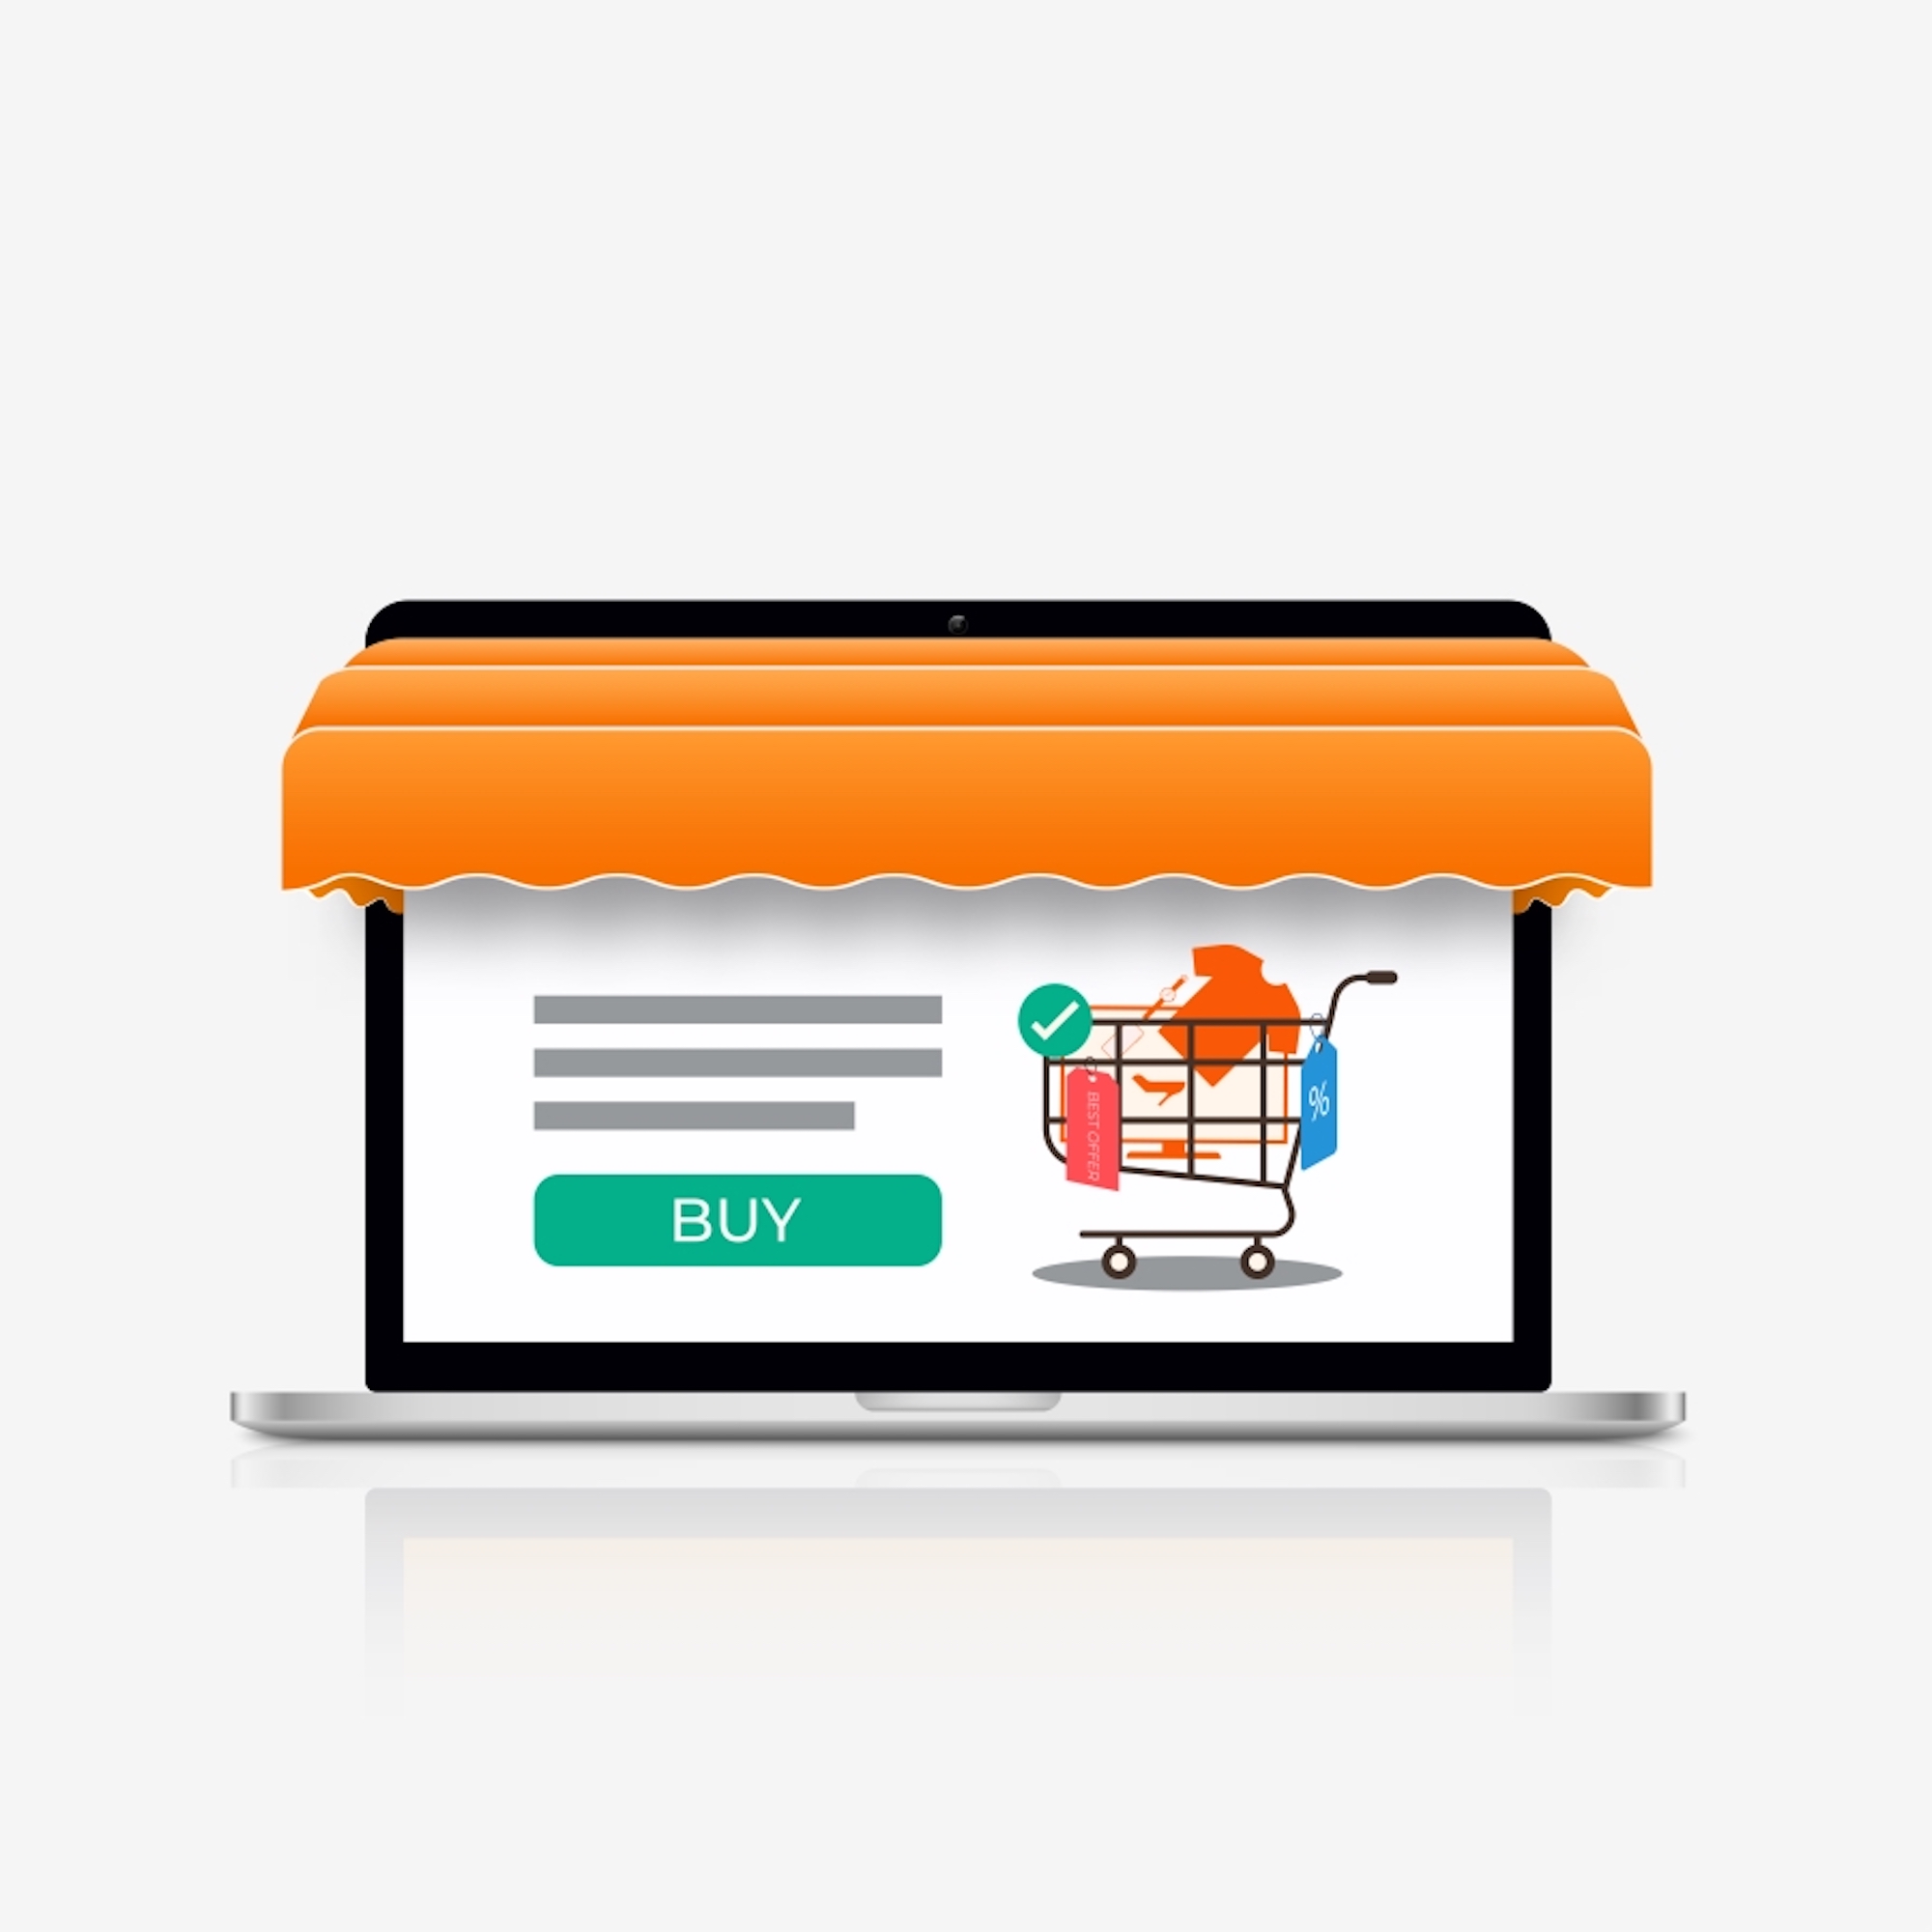 What Makes An Excellent Checkout Page?